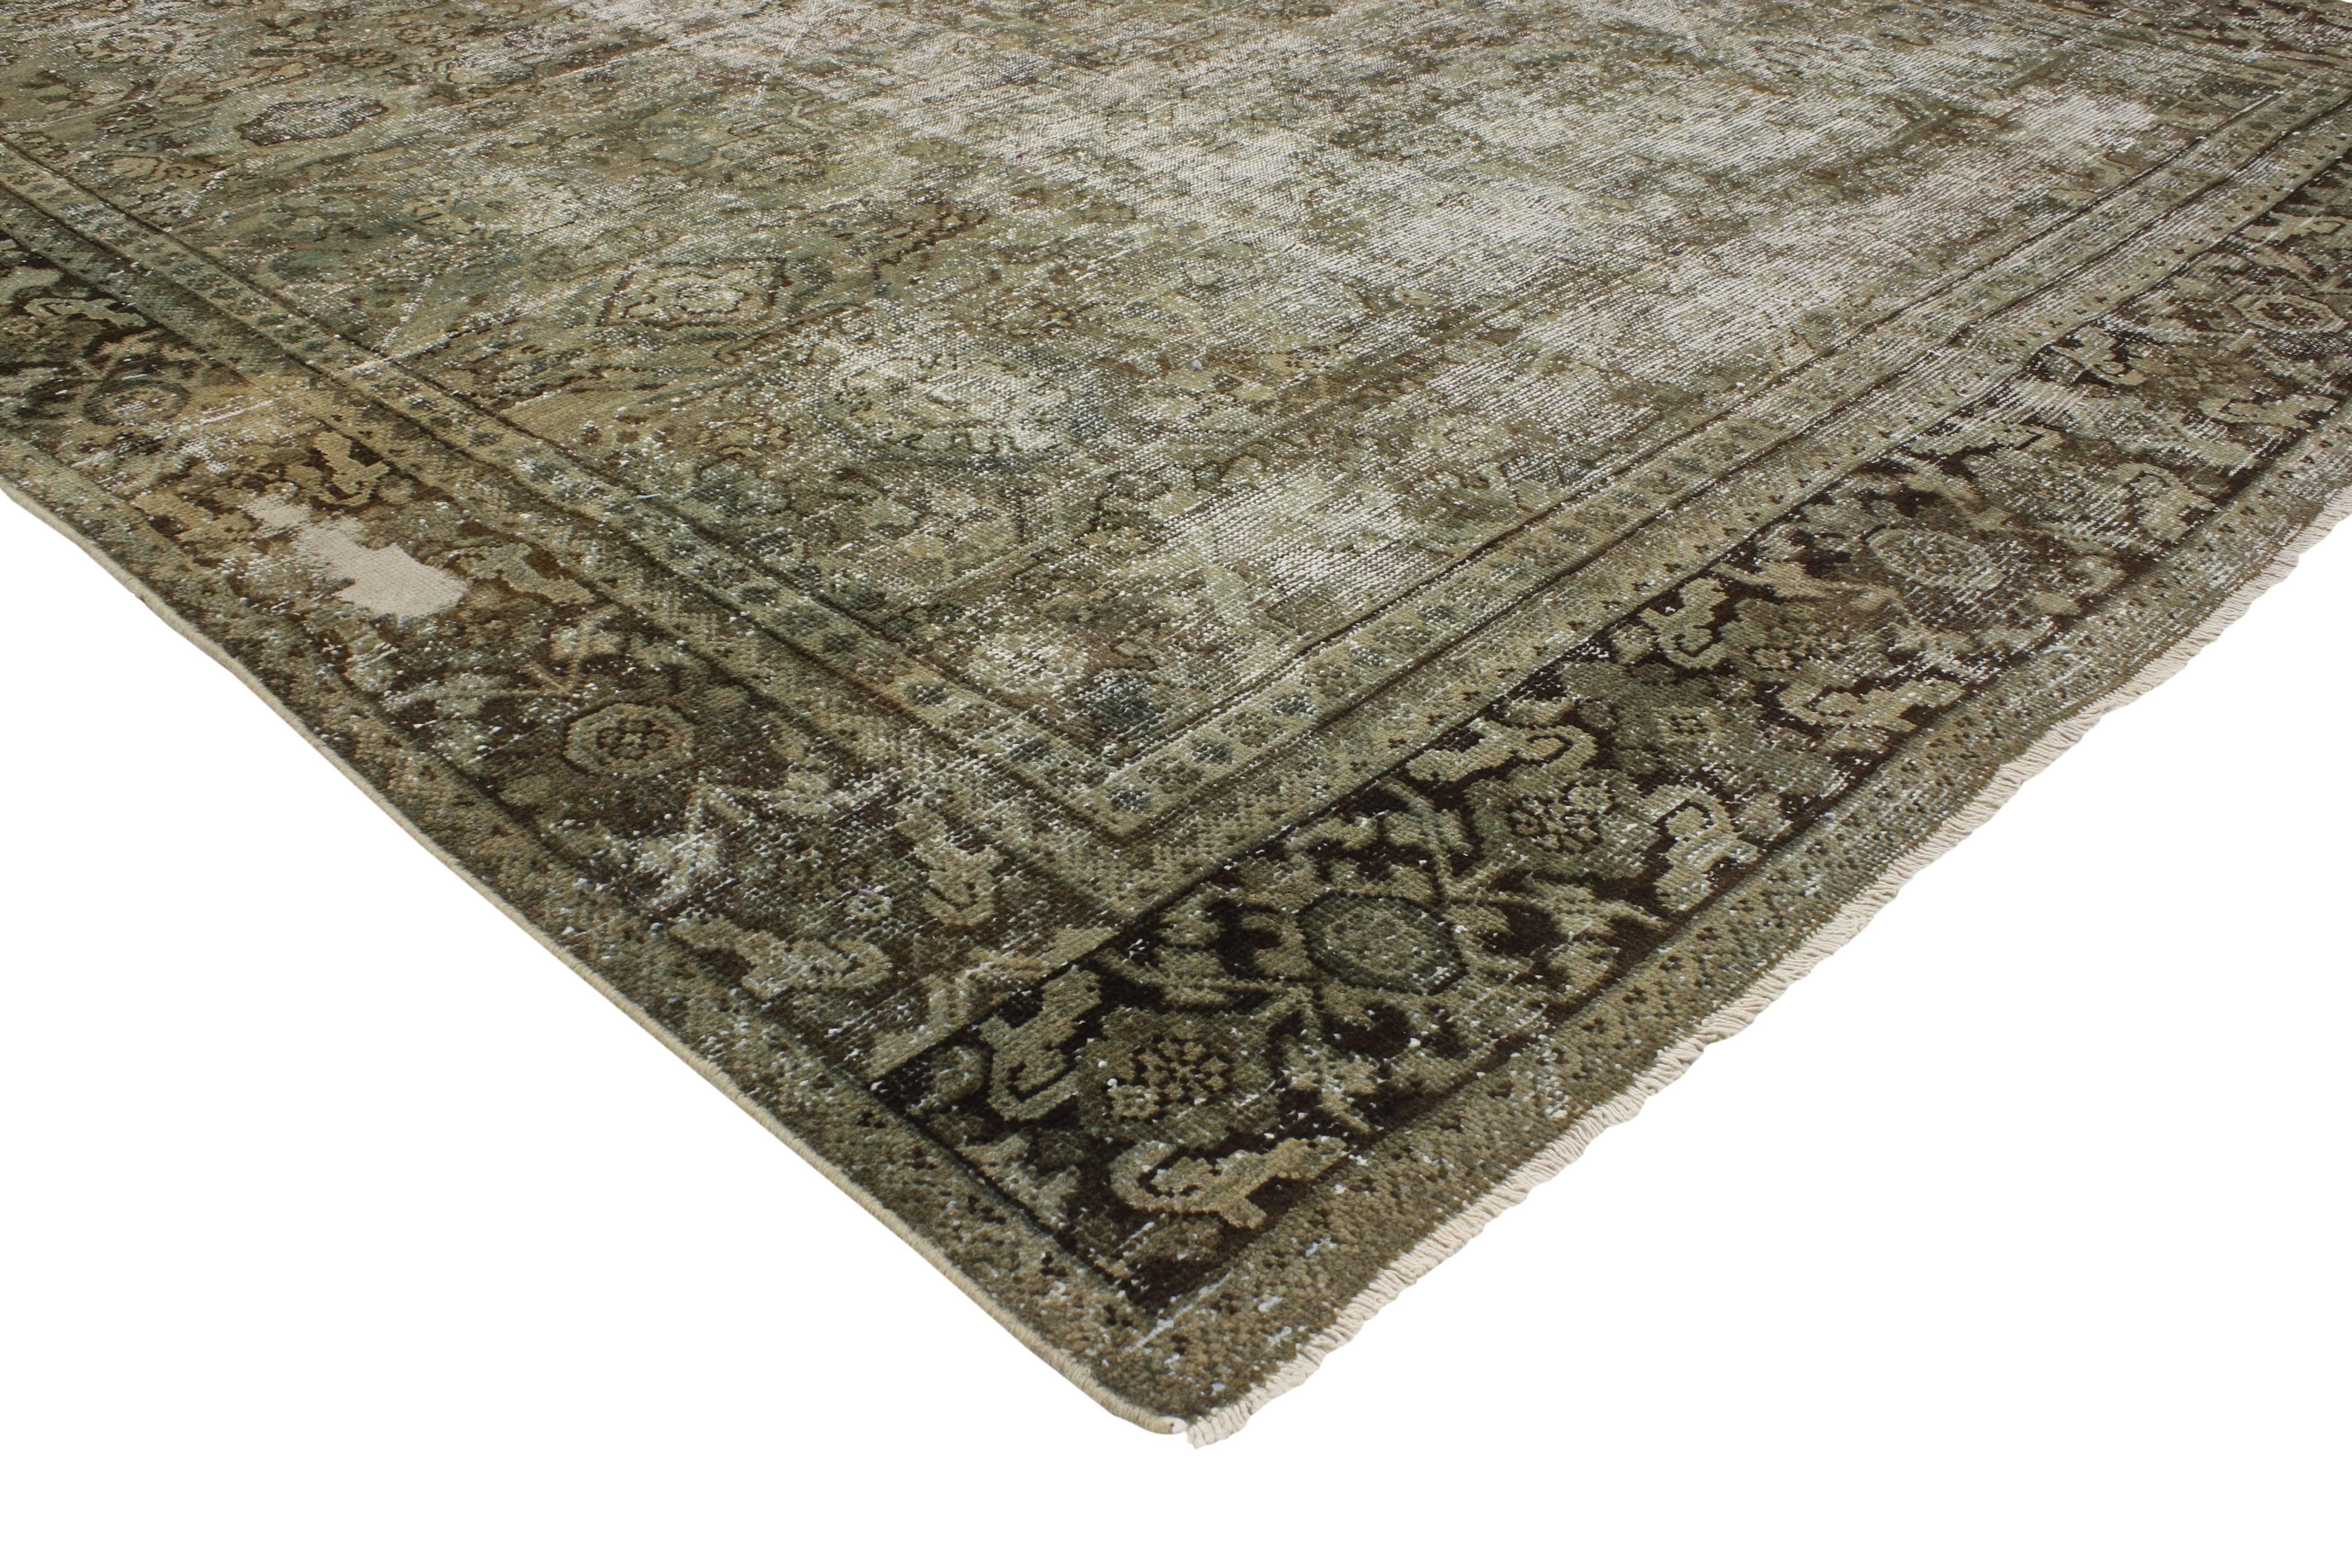 76829 Distressed Antique Persian Mahal Rug with Traditional English Rustic Style 07'04 x 10'04. With its perfectly worn-in charm and rustic sensibility, this hand-knotted wool distressed antique Persian Mahal rug will take on a curated lived-in look